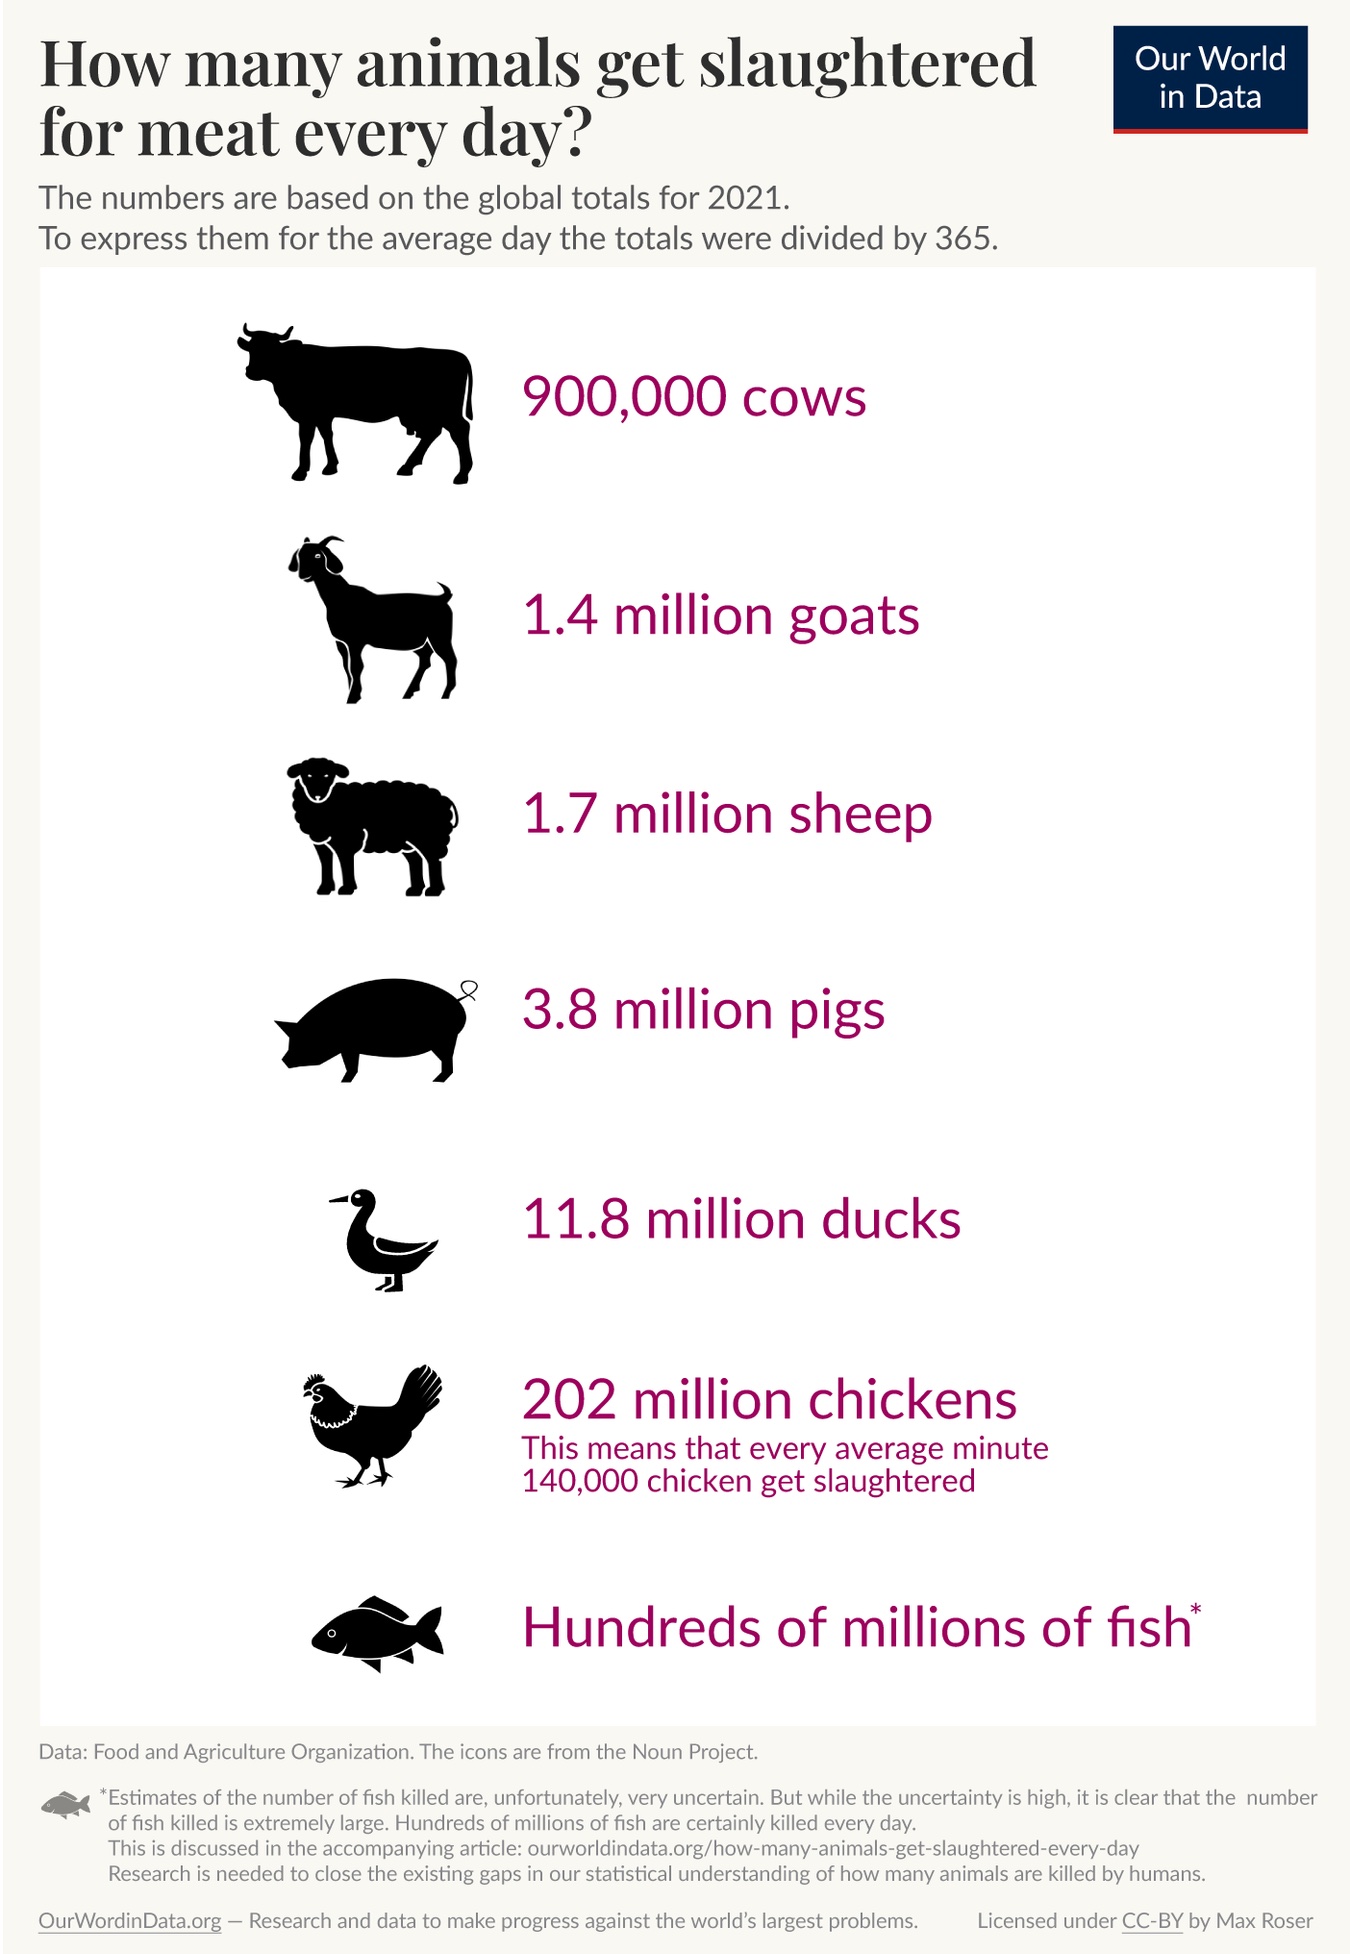 How many animals get slaughtered for meat every day.